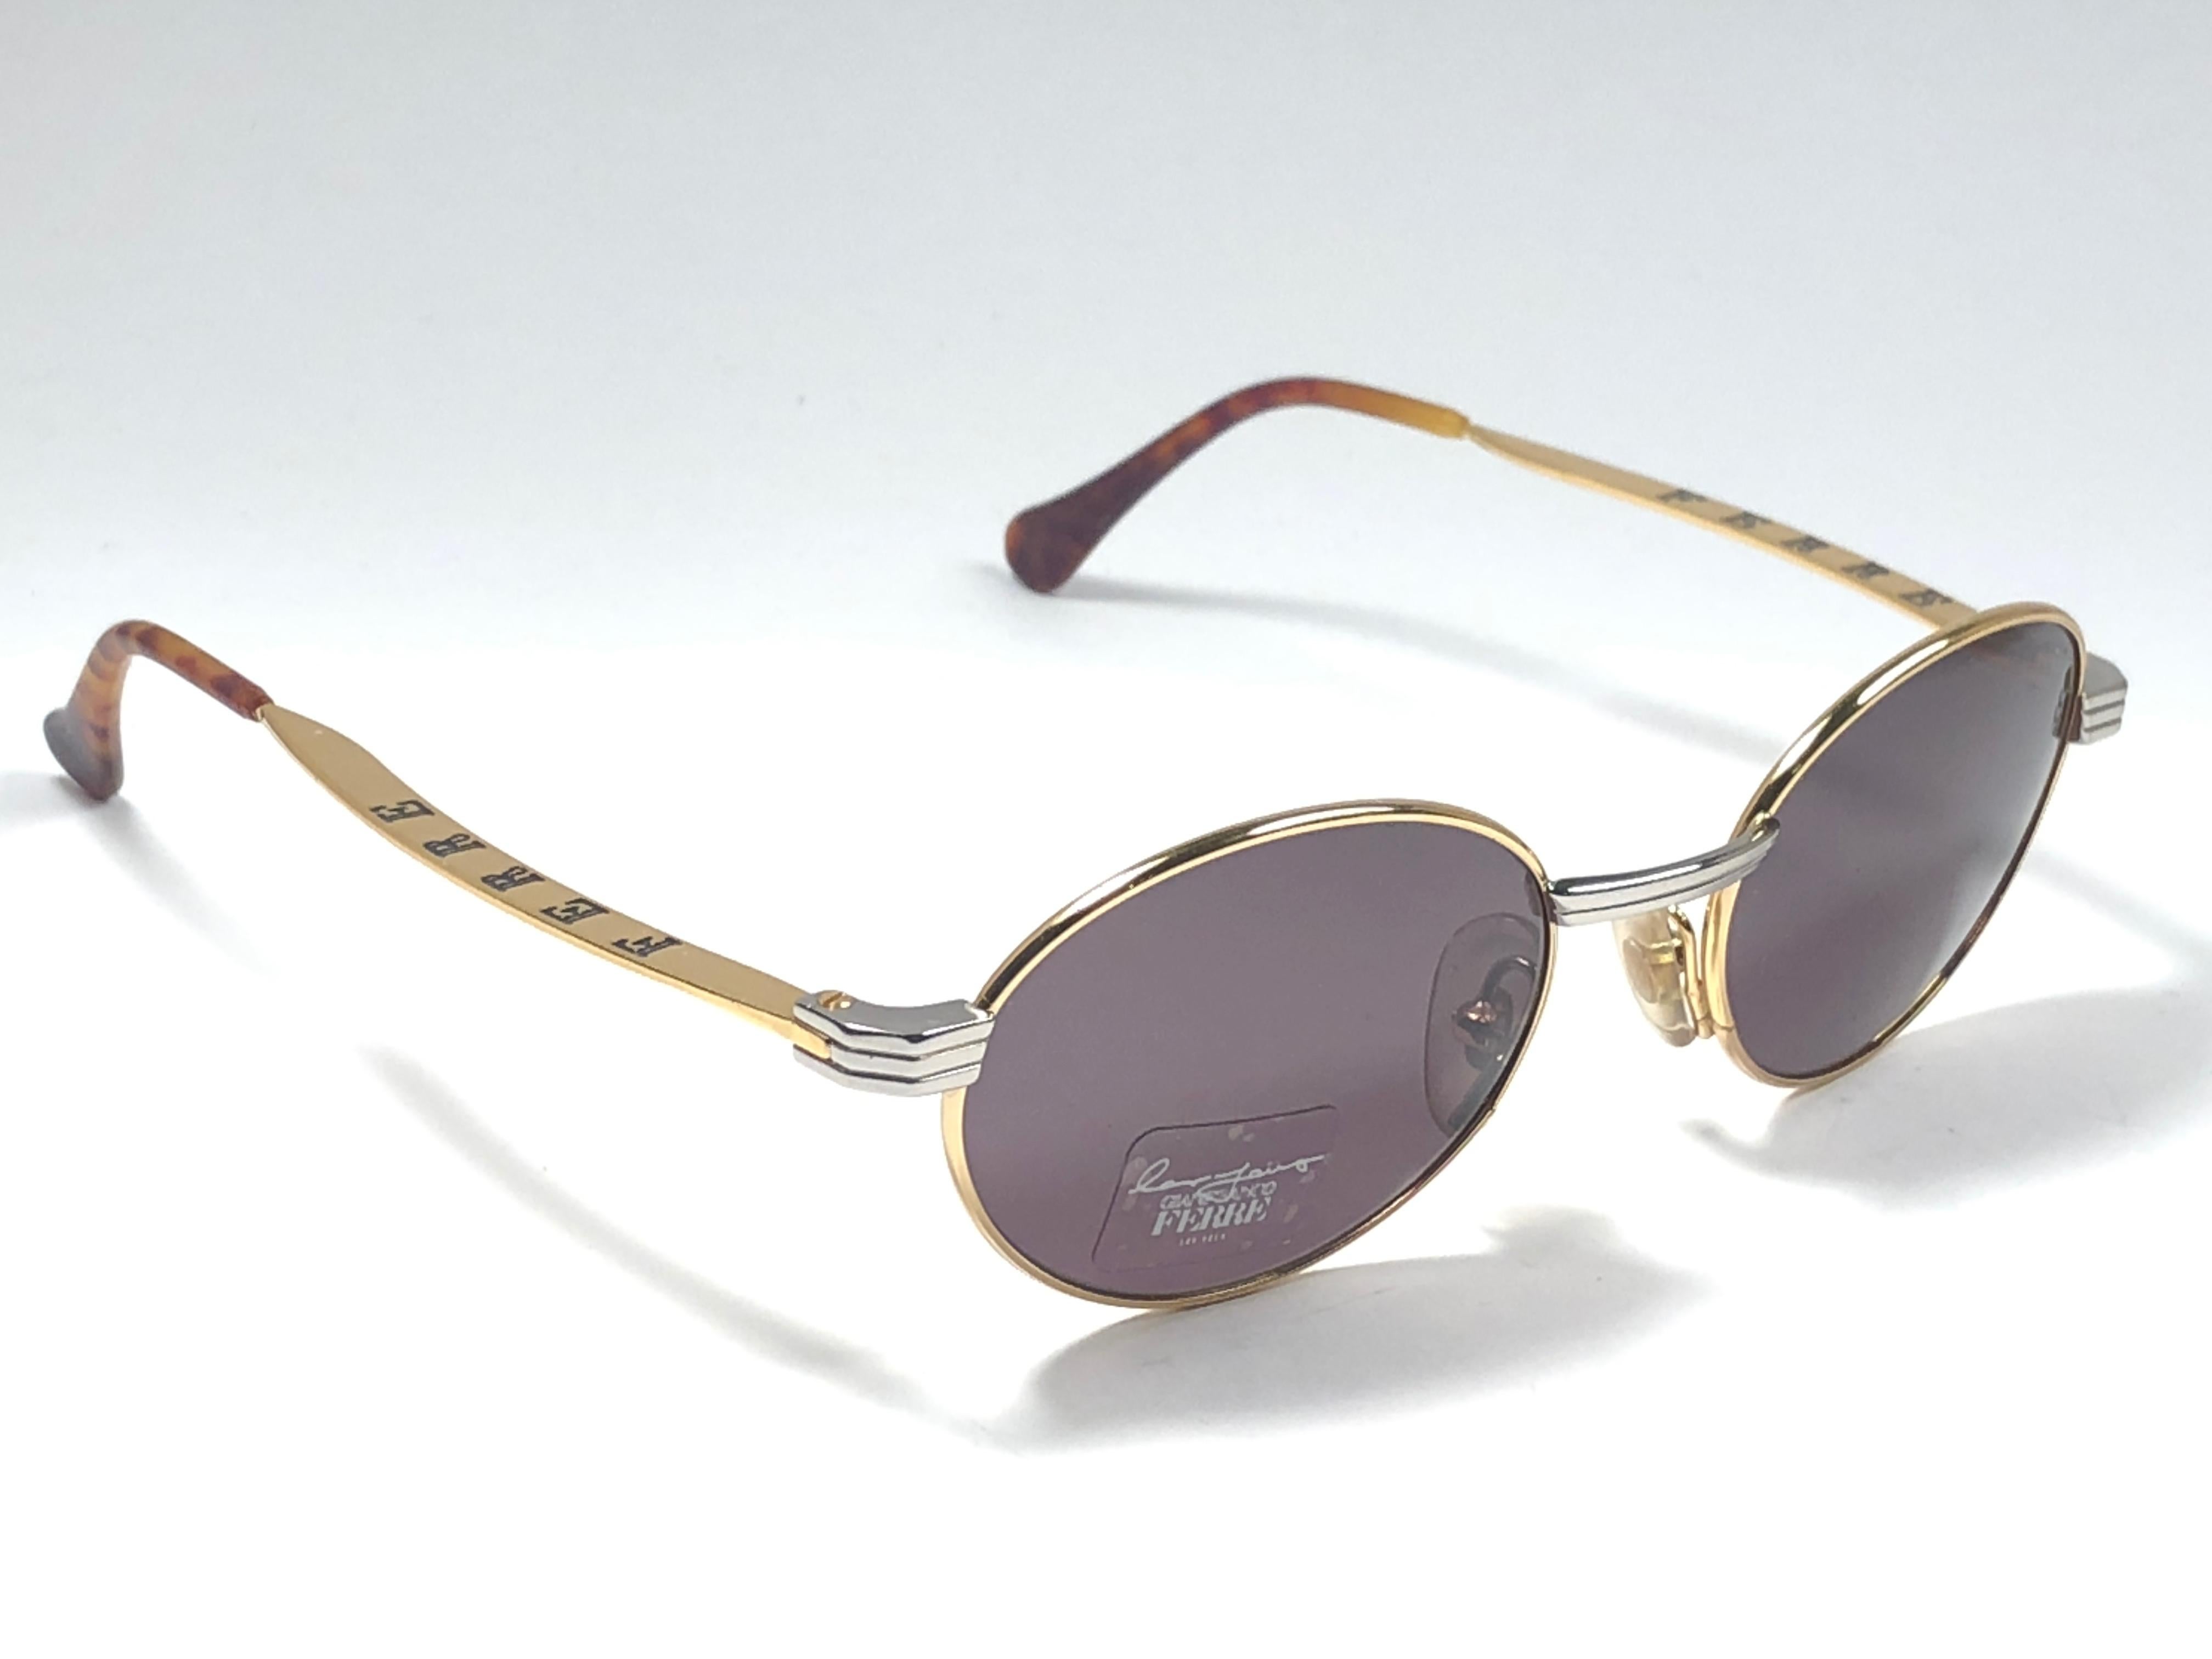 New vintage Gianfranco Ferre sunglasses.    

Gold and silver details frame holding a pair of spotless grey lenses.   

New, never worn or displayed. 

 Made in Italy.